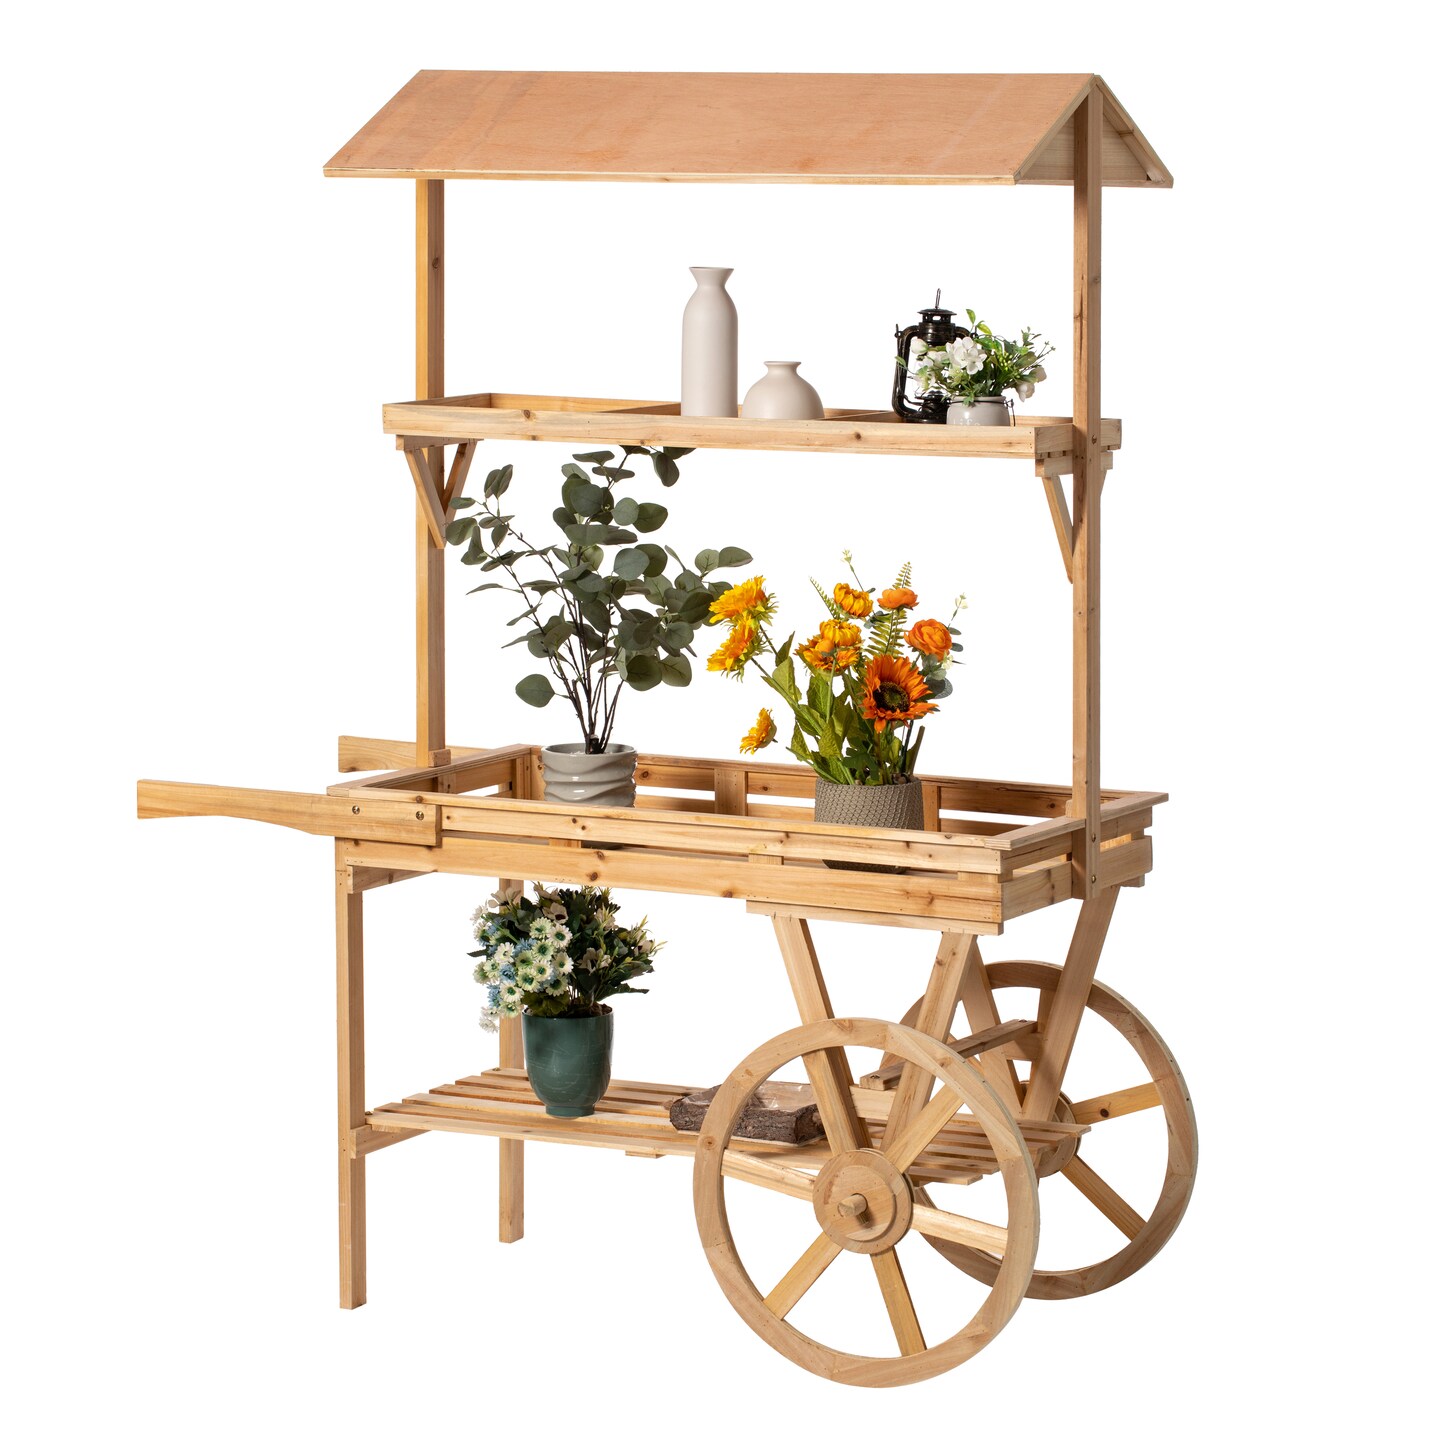 Large Wooden 3 Tier Rolling Table Cart with 2 Wheels for Home Decor Modern Wagon with Shelves for Display Rack, Coffee Station, Food Stand, Beverage Bar, and Tea Stall